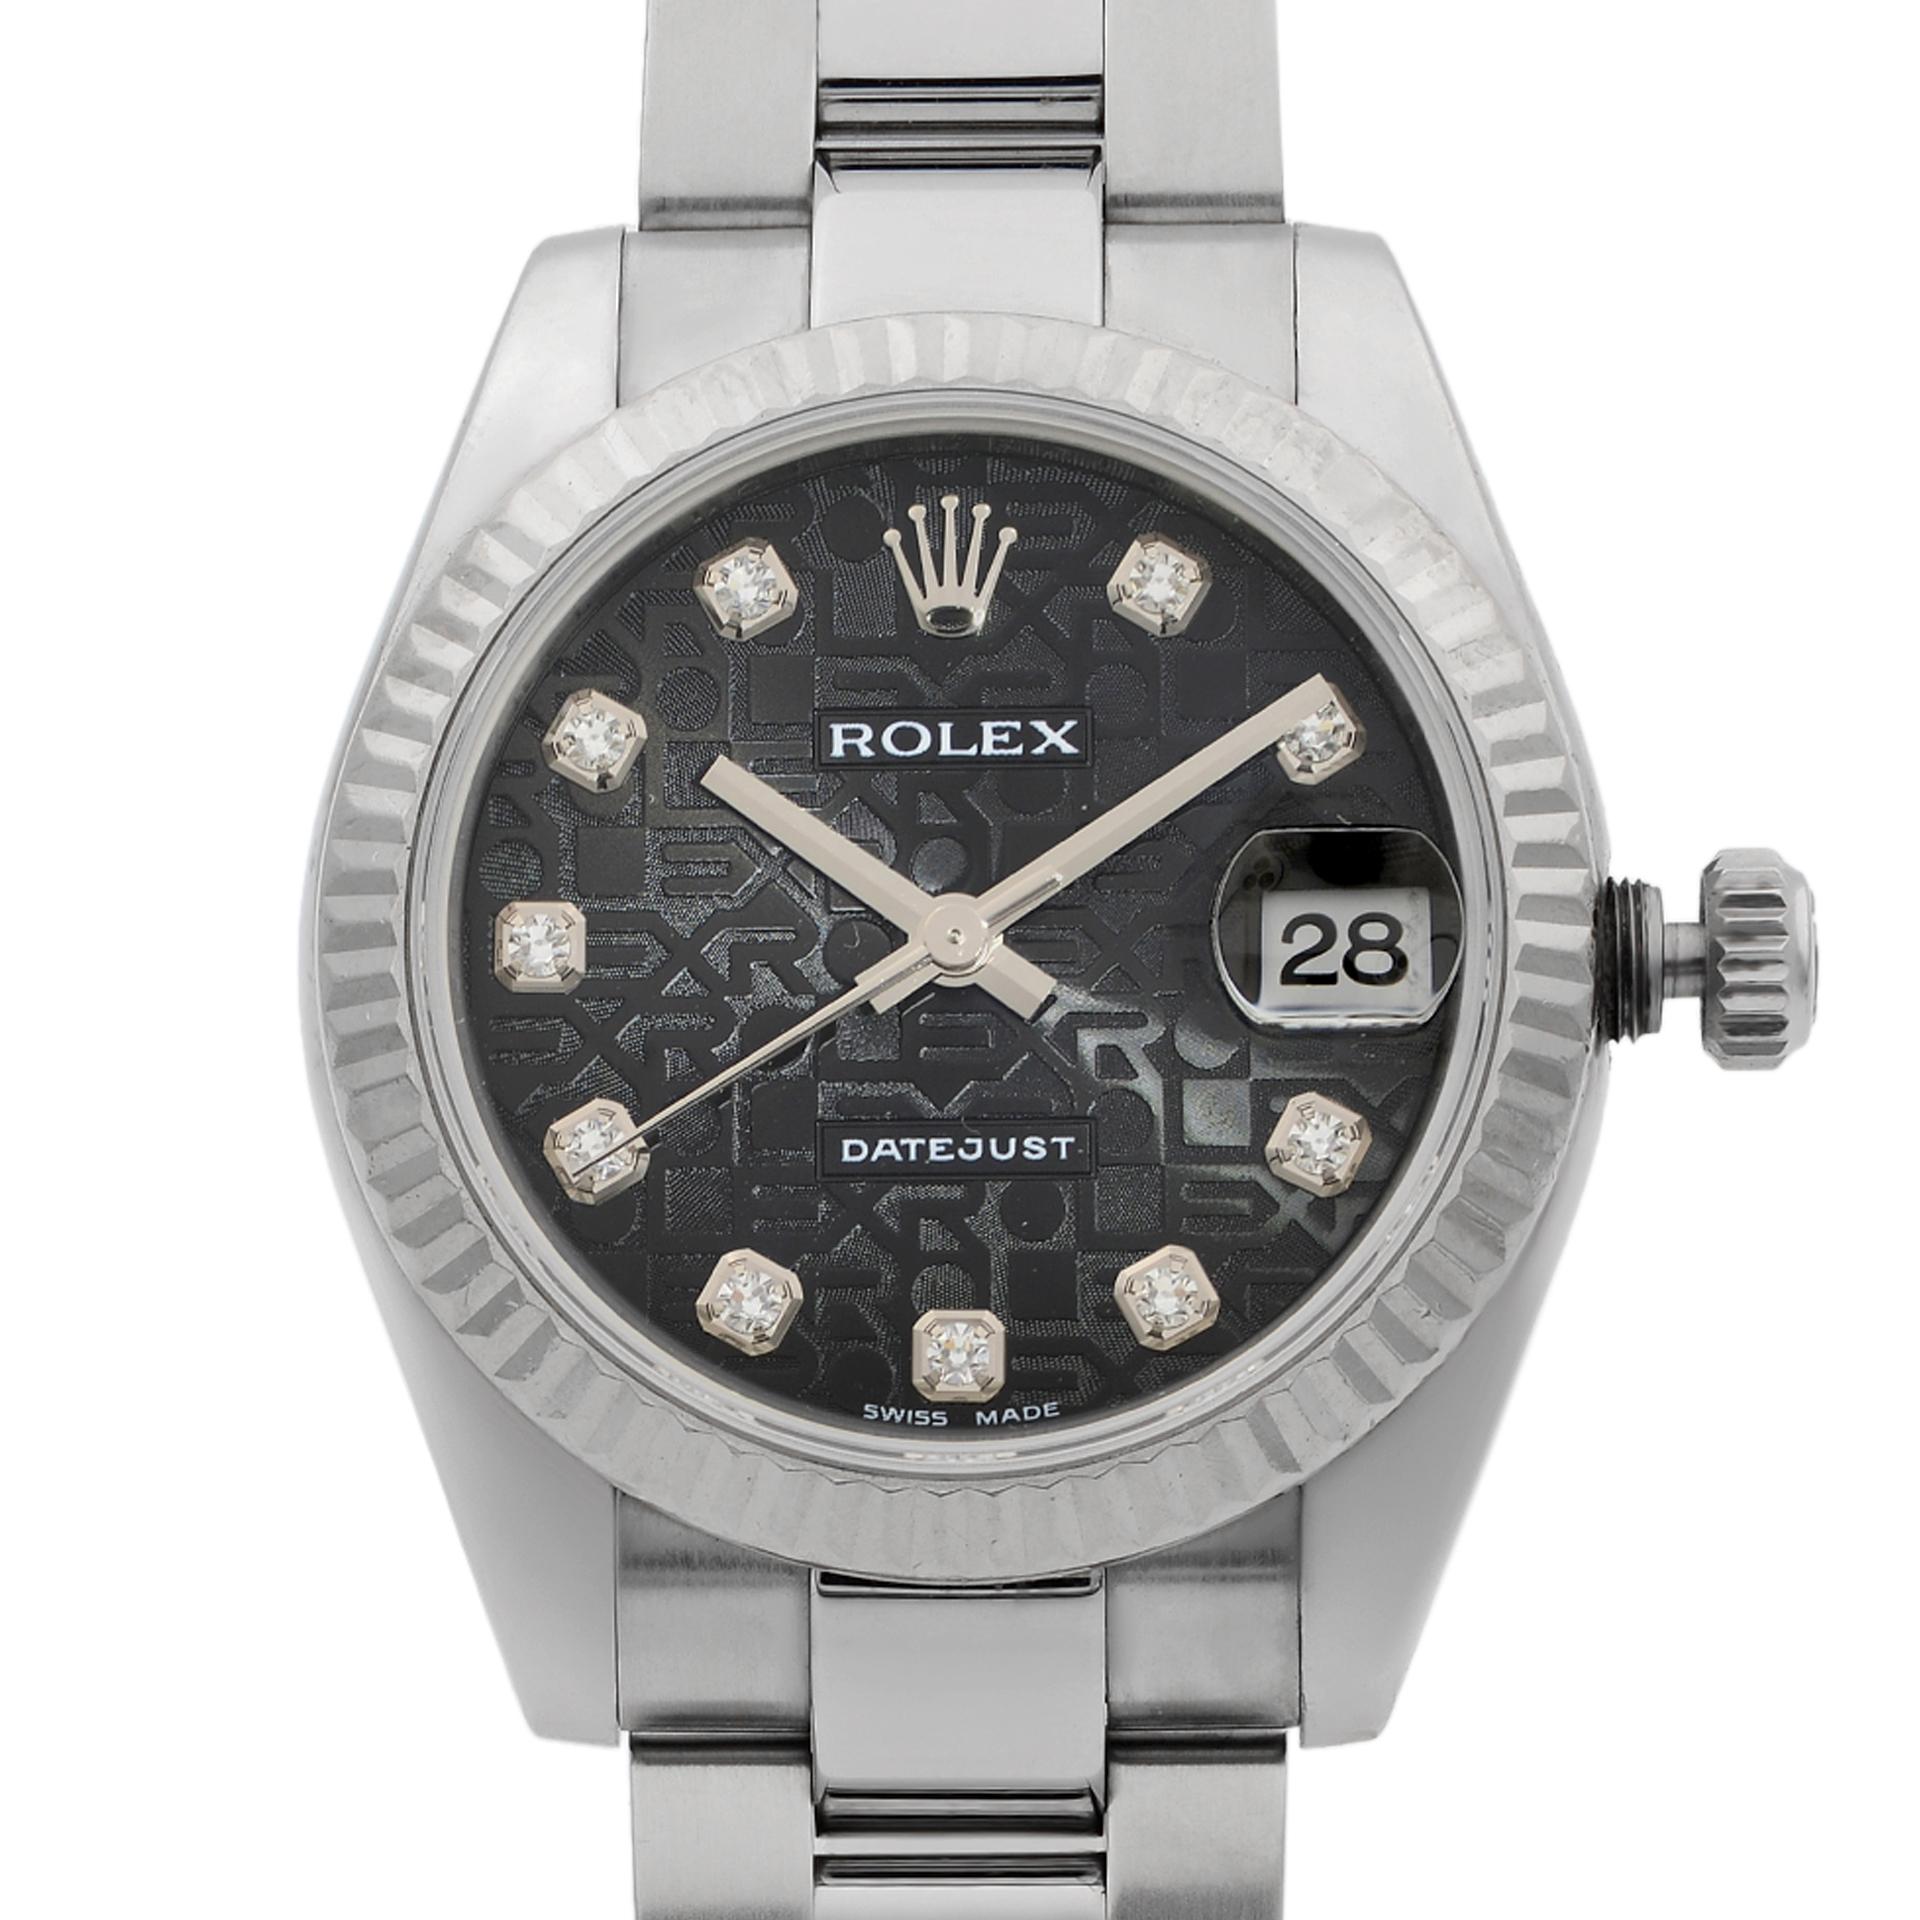 This pre-owned Rolex Datejust  178274 is a beautiful Ladie's timepiece that is powered by a mechanical (automatic) movement which is cased in a stainless steel case. It has a round shape face, date indicator dial, and has hand diamonds style